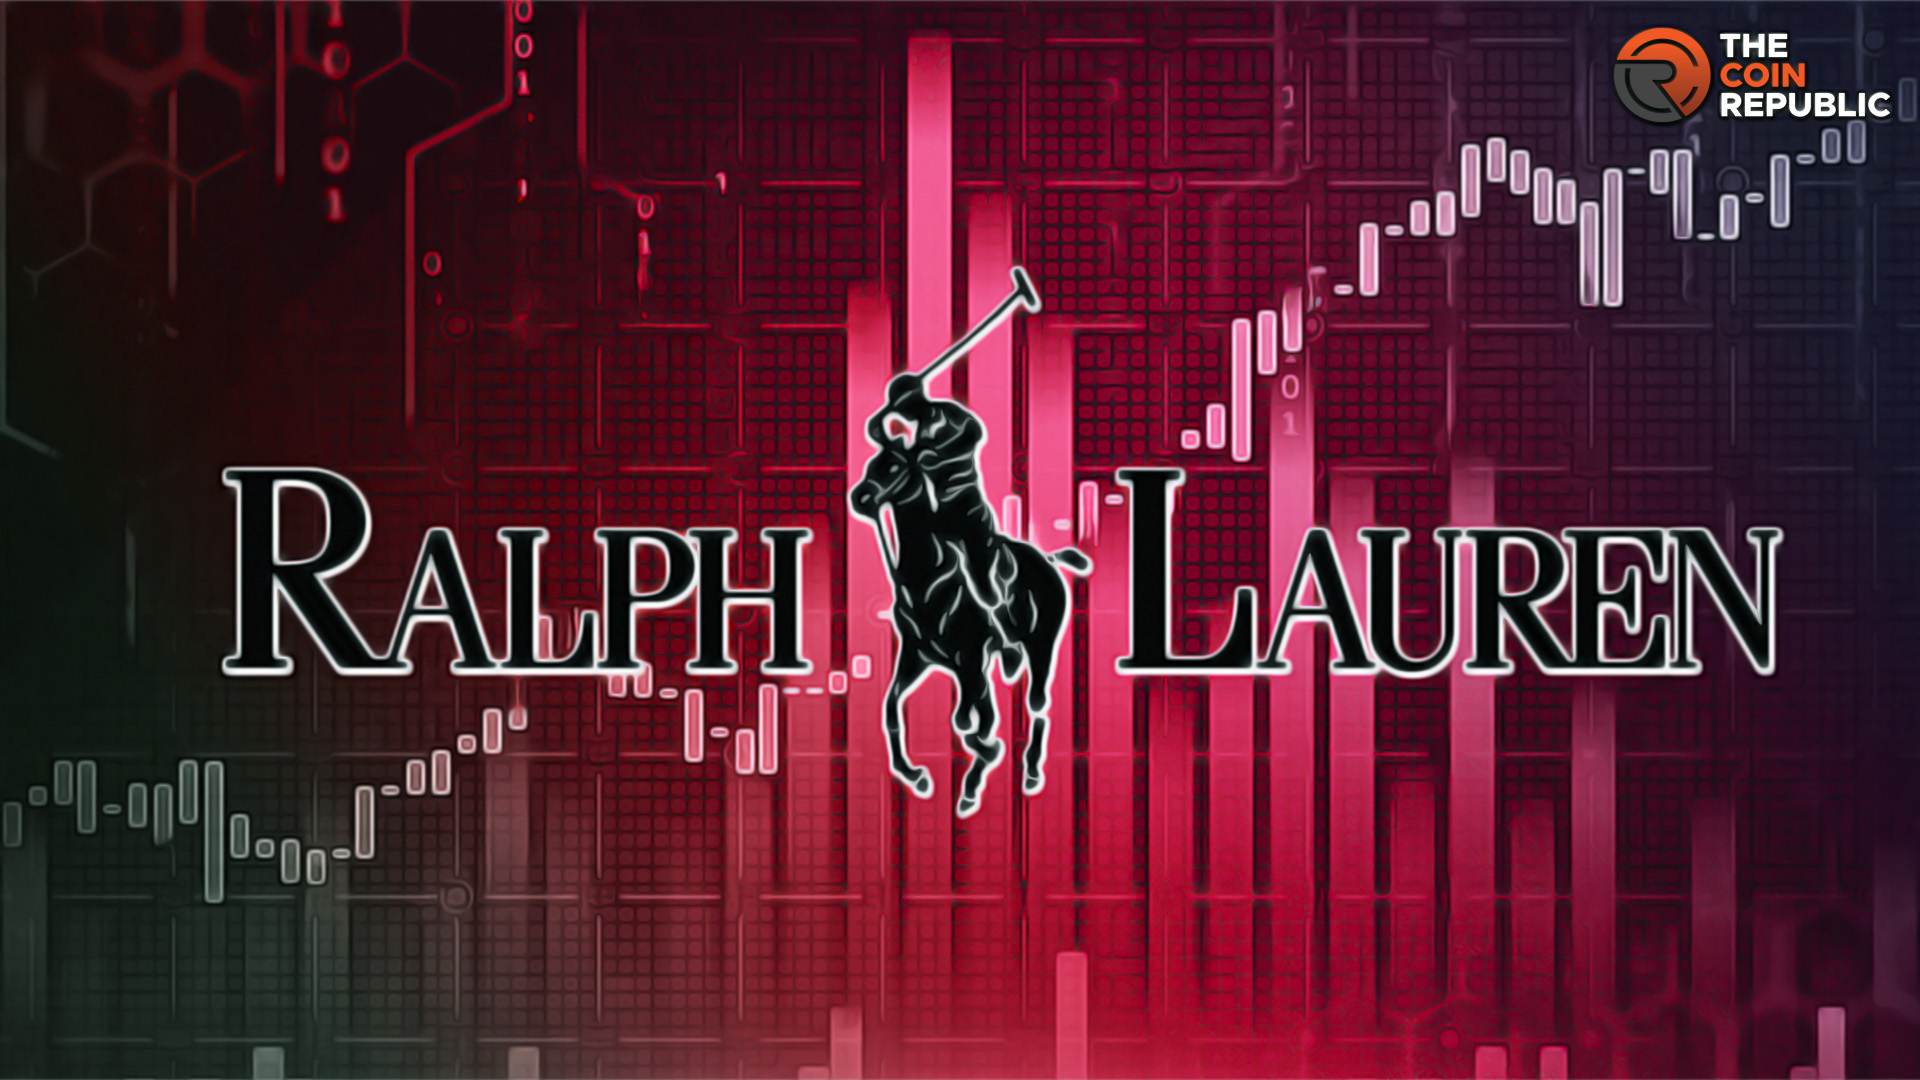 Ralph Lauren Corp. (RL Stock): Price Up By 22% Since June 